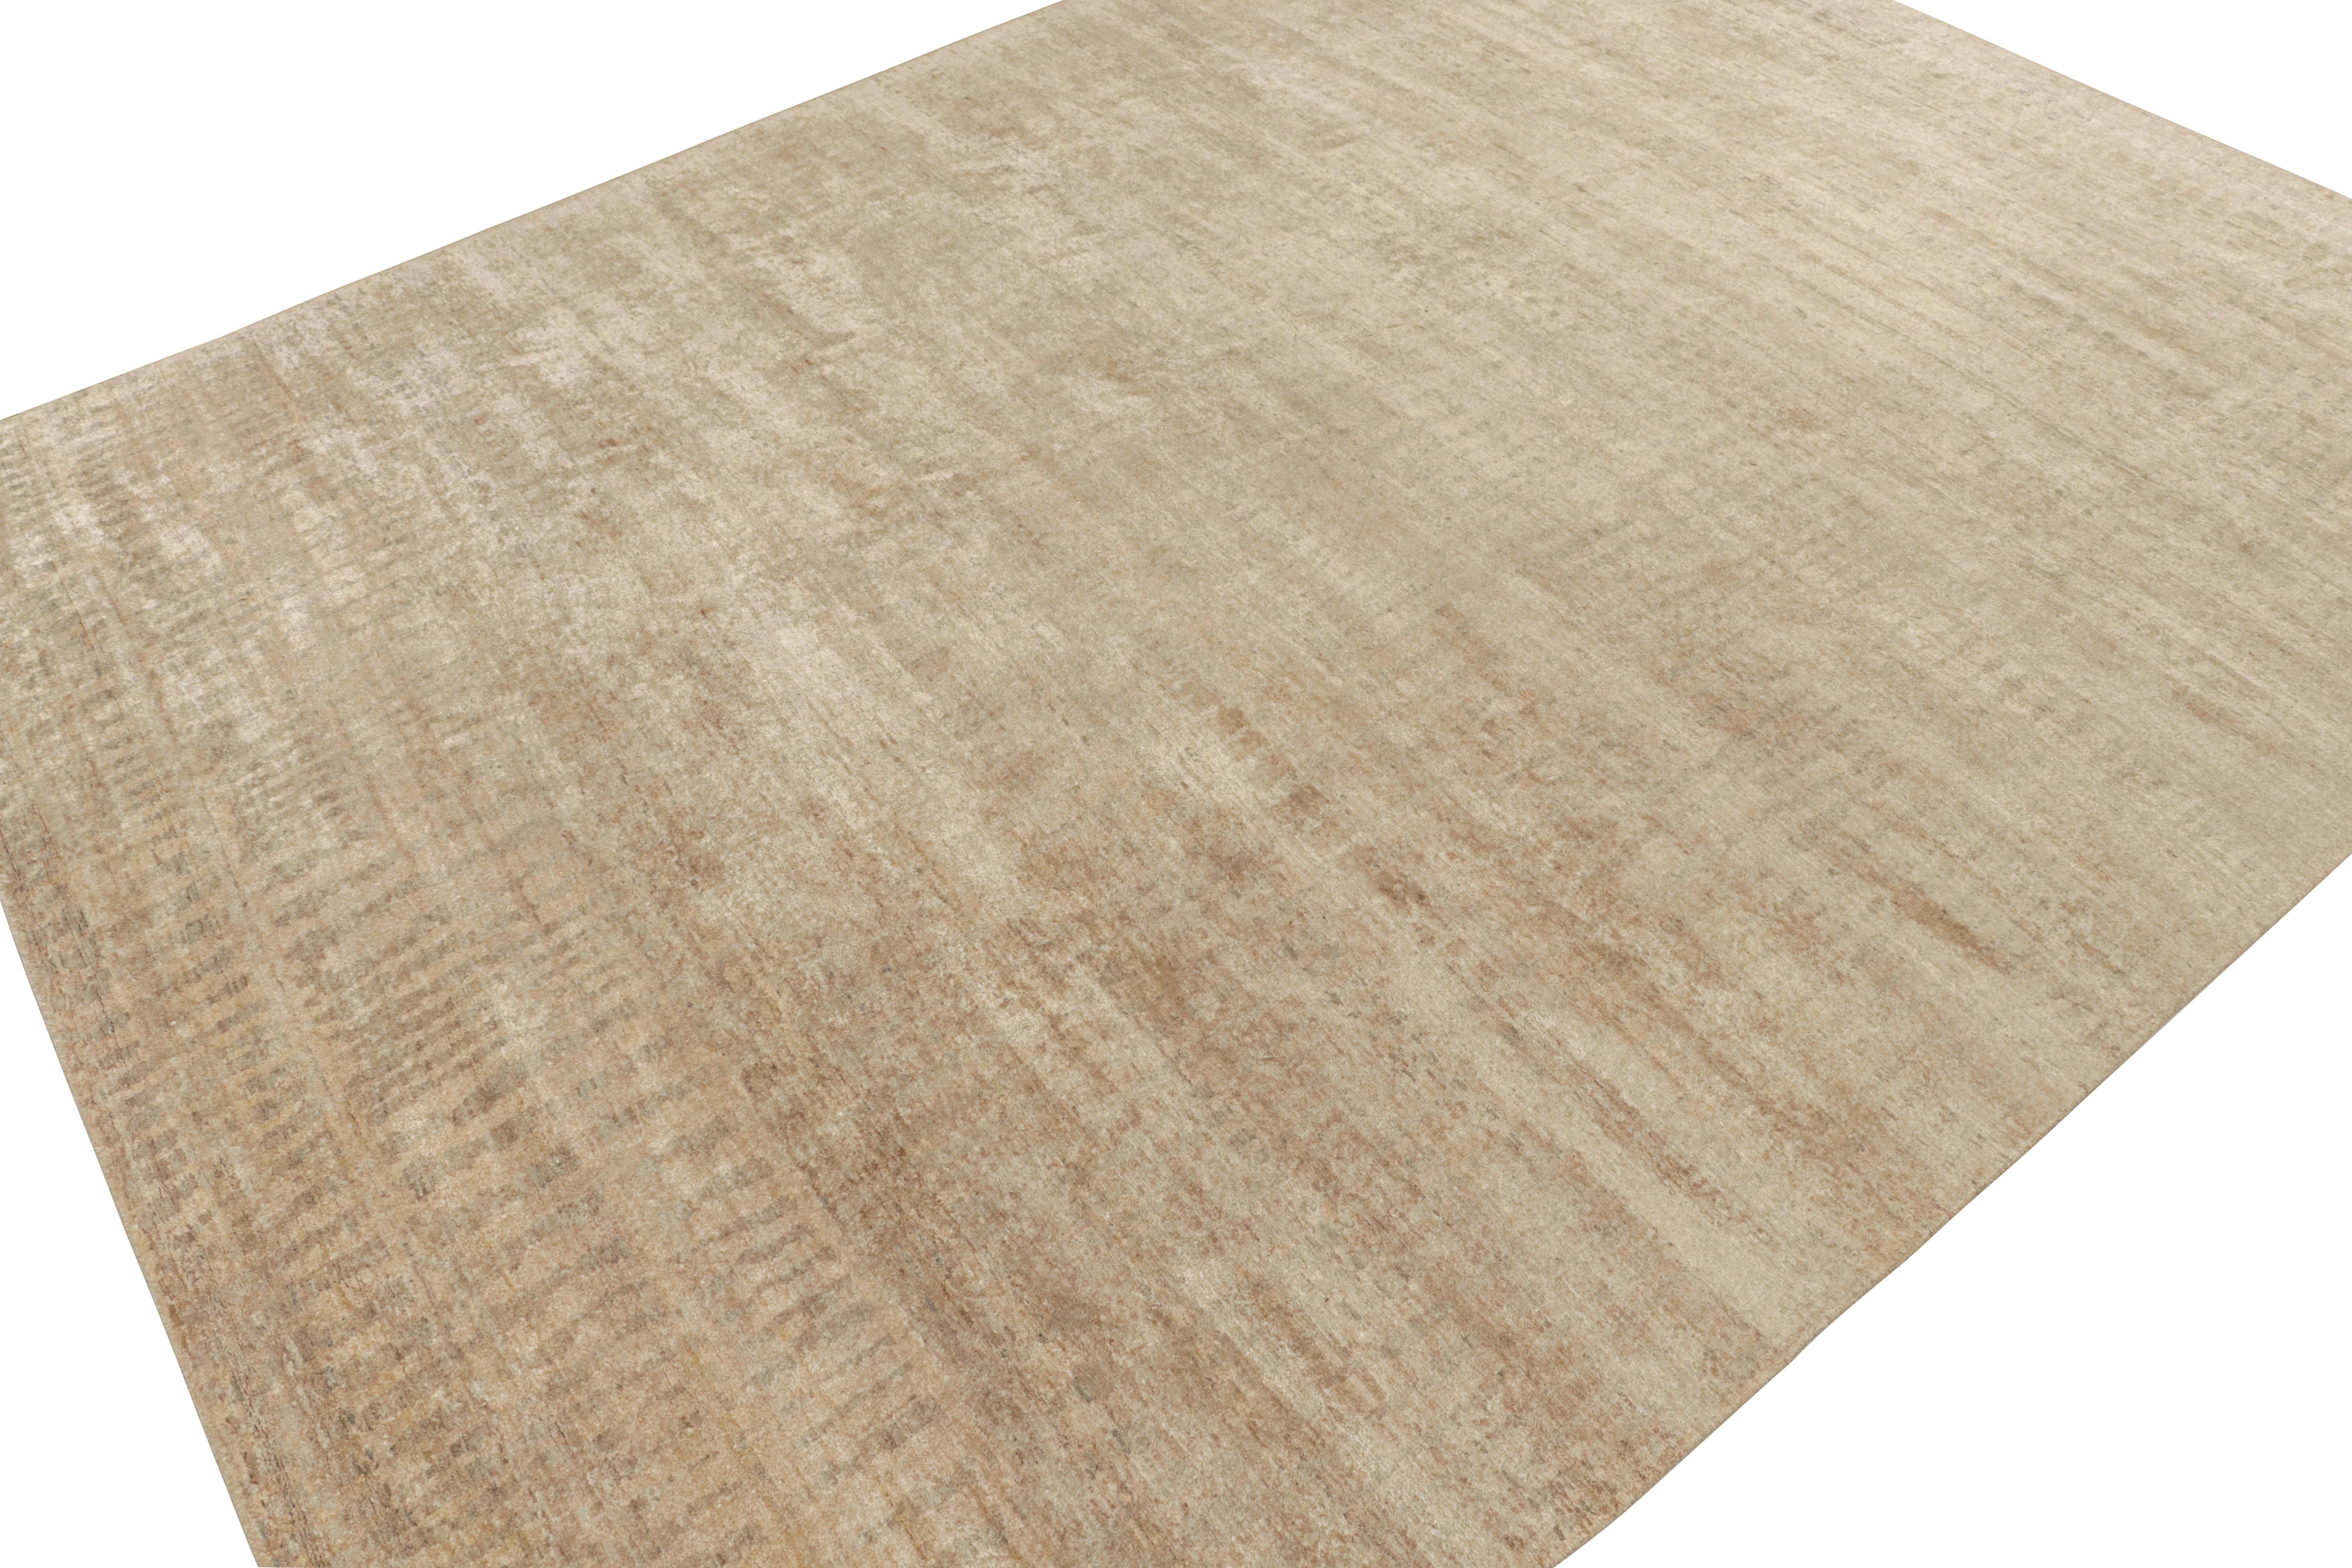 Modern Rug & Kilim’s Contemporary Rug in Beige-Brown Tone-on-Tone Striae For Sale